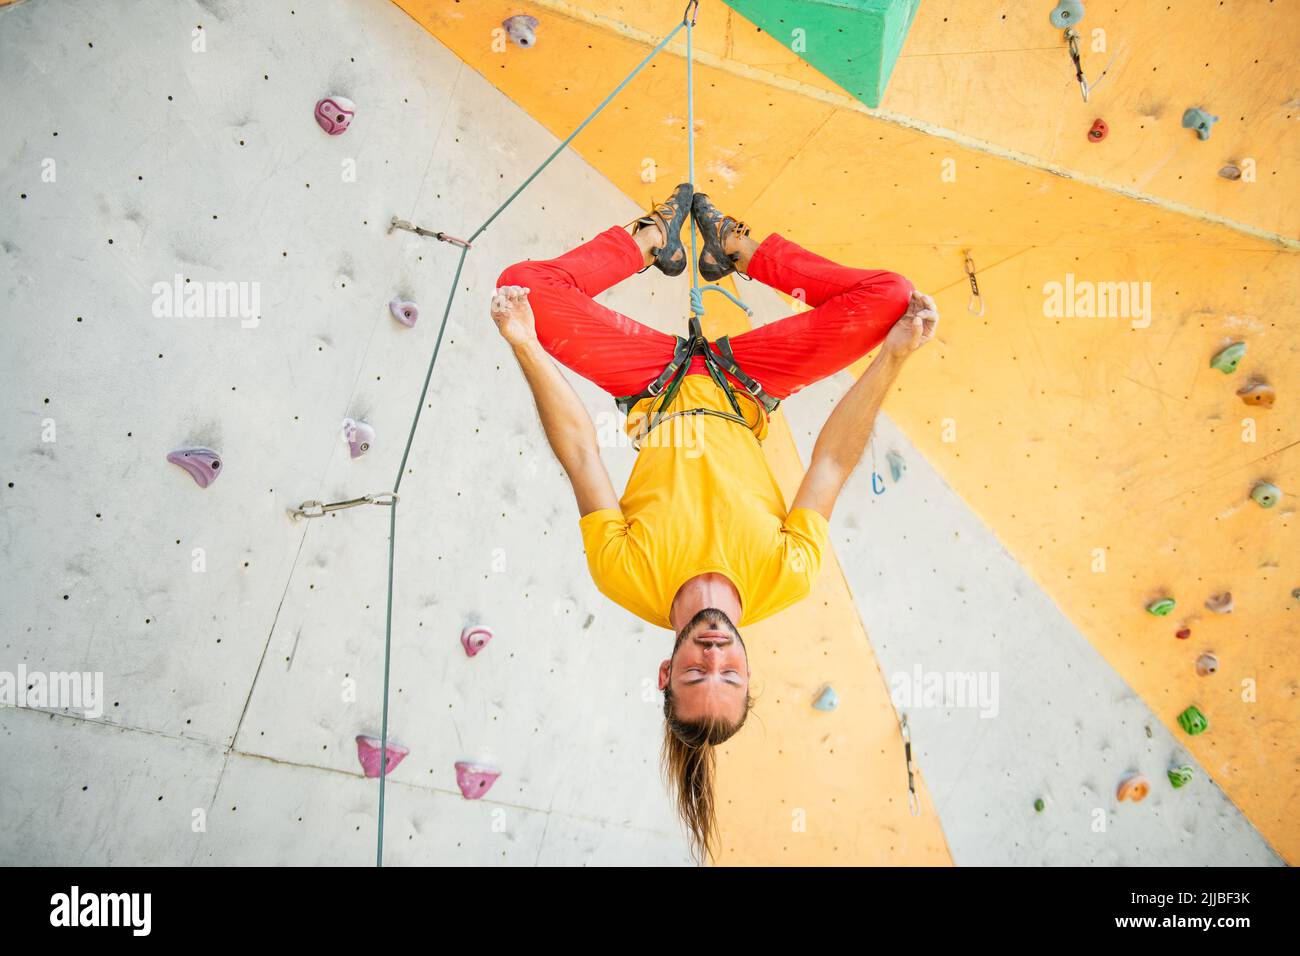 A man hangs upside down in a lotus position on a climbing wall. The man is wearing a yellow T-shirt and red pants. Stock Photo